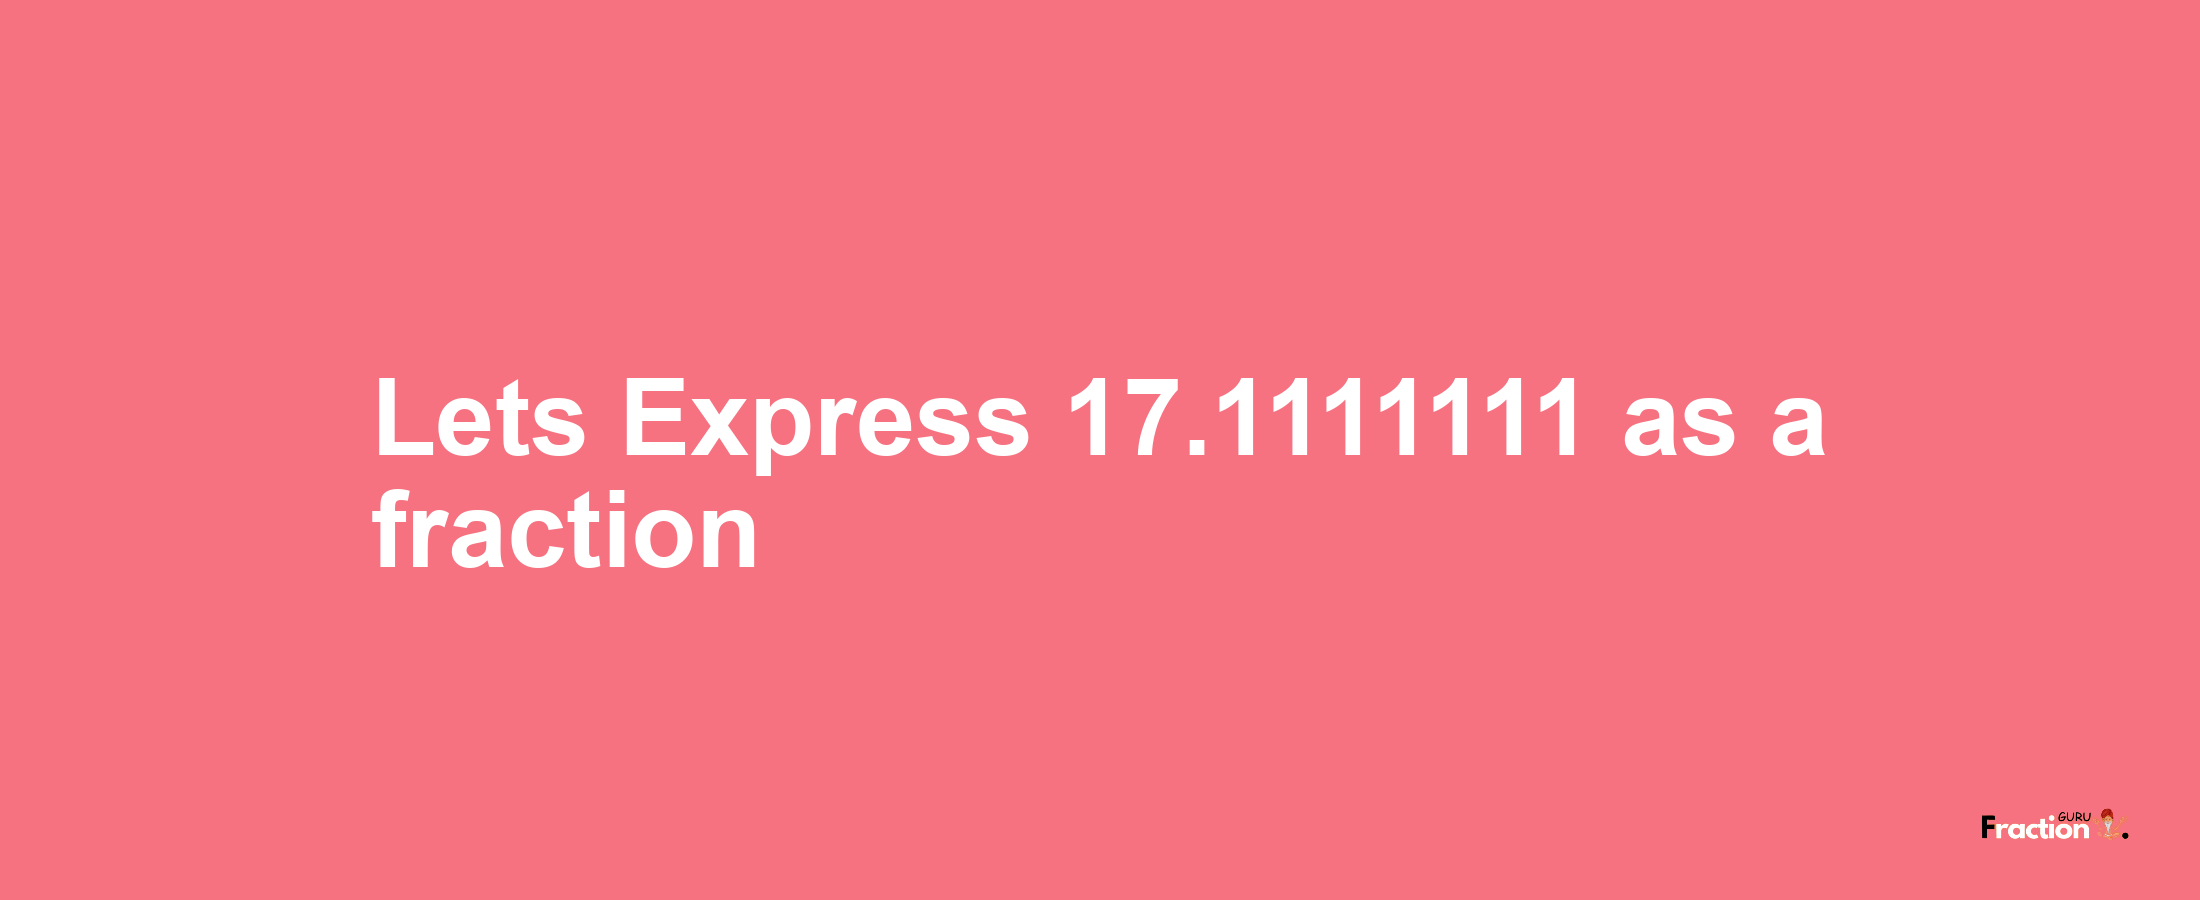 Lets Express 17.1111111 as afraction